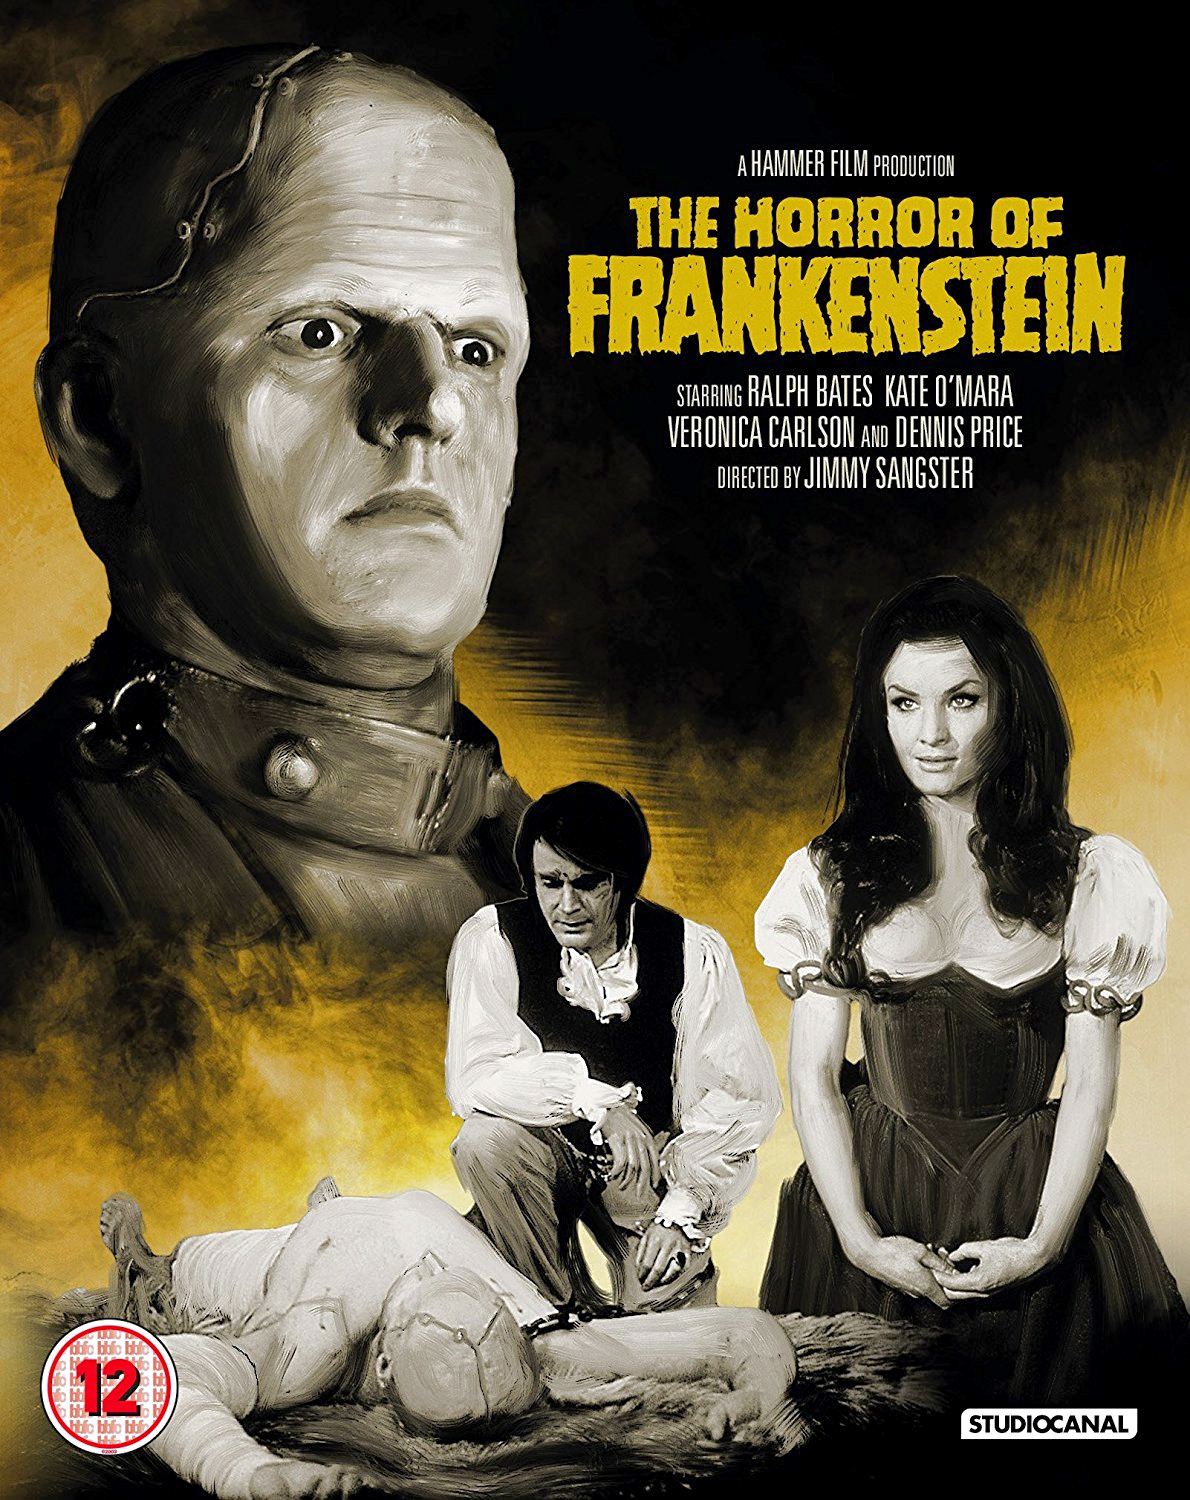 The Horror of Frankenstein Blu-ray from Studiocanal